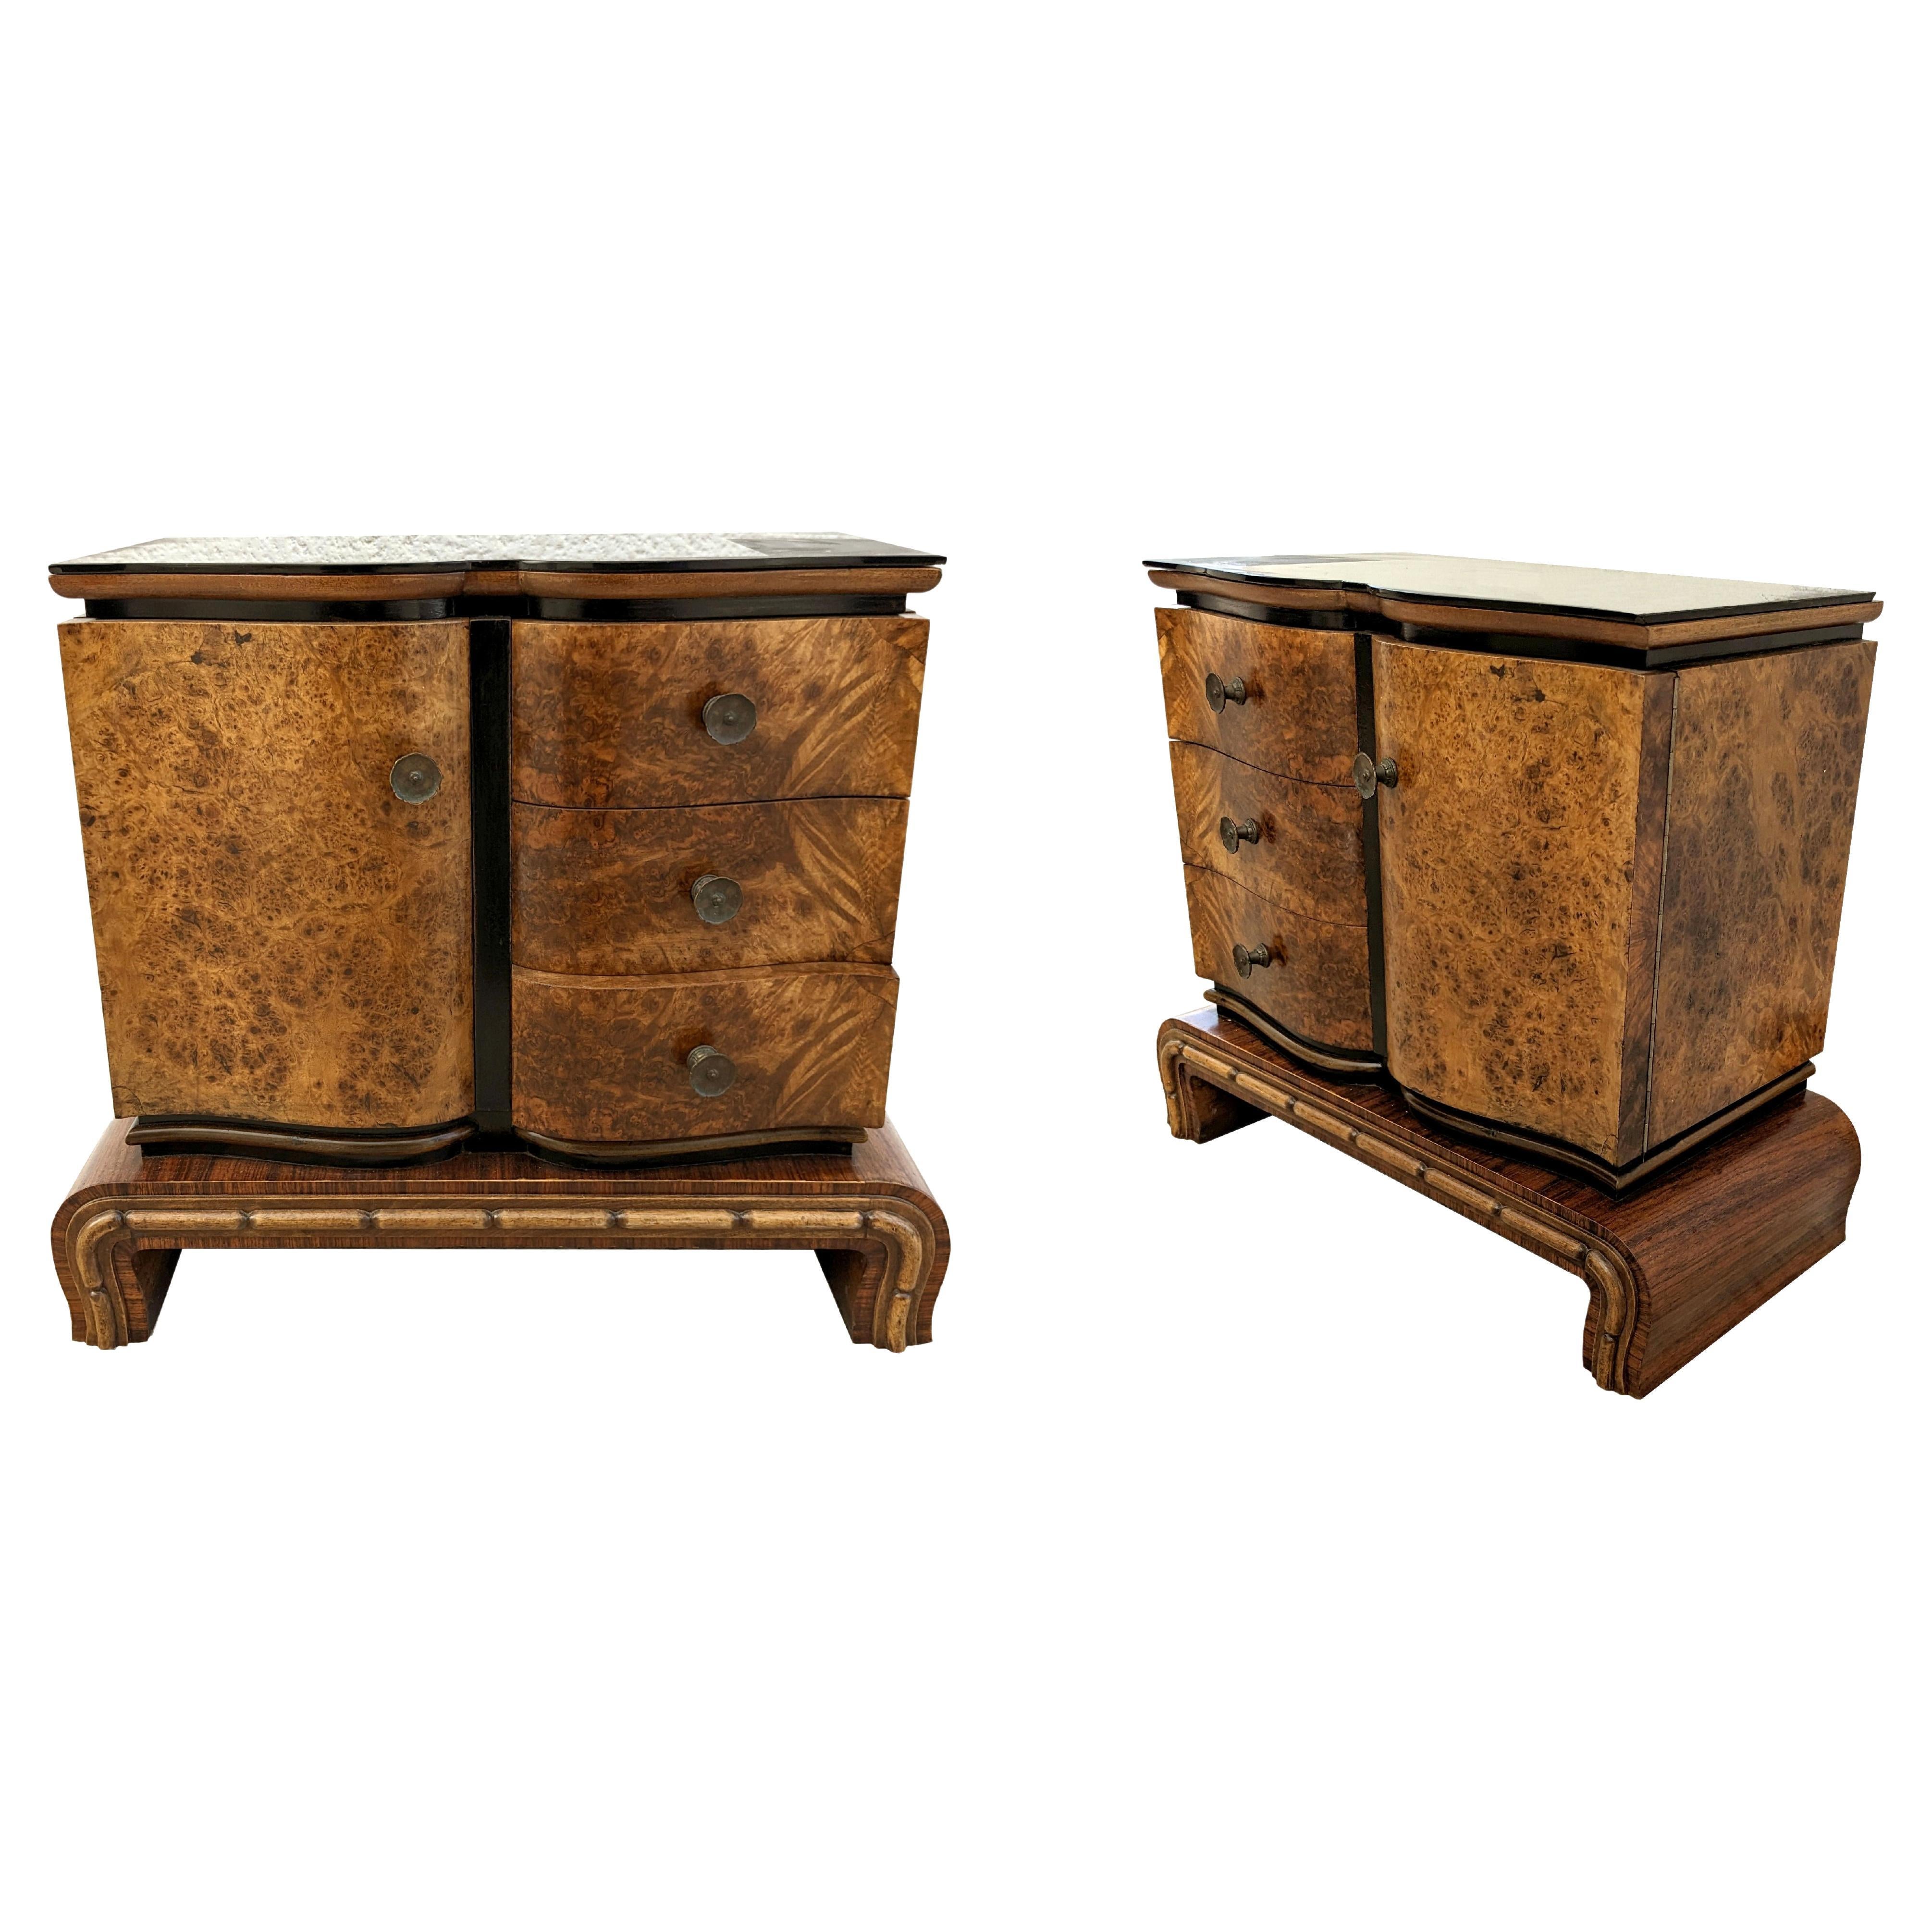 Art Deco Italian Pair of Matching Bedside Cabinet, Nightstands in Walnut, c1930 For Sale